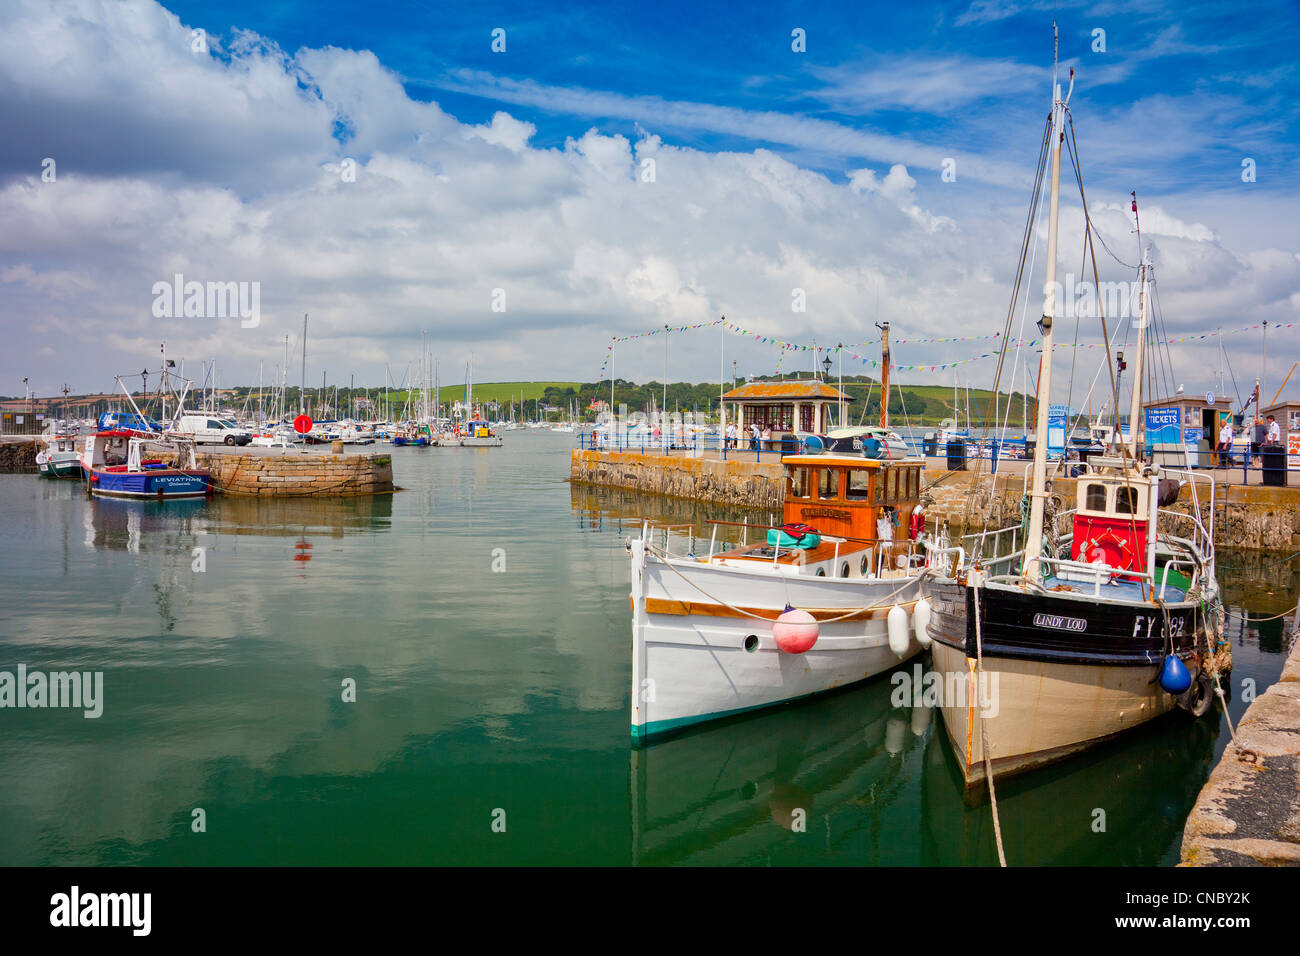 A mixture of different boats and yachts in Falmouth harbour, Cornwall, England, UK Stock Photo